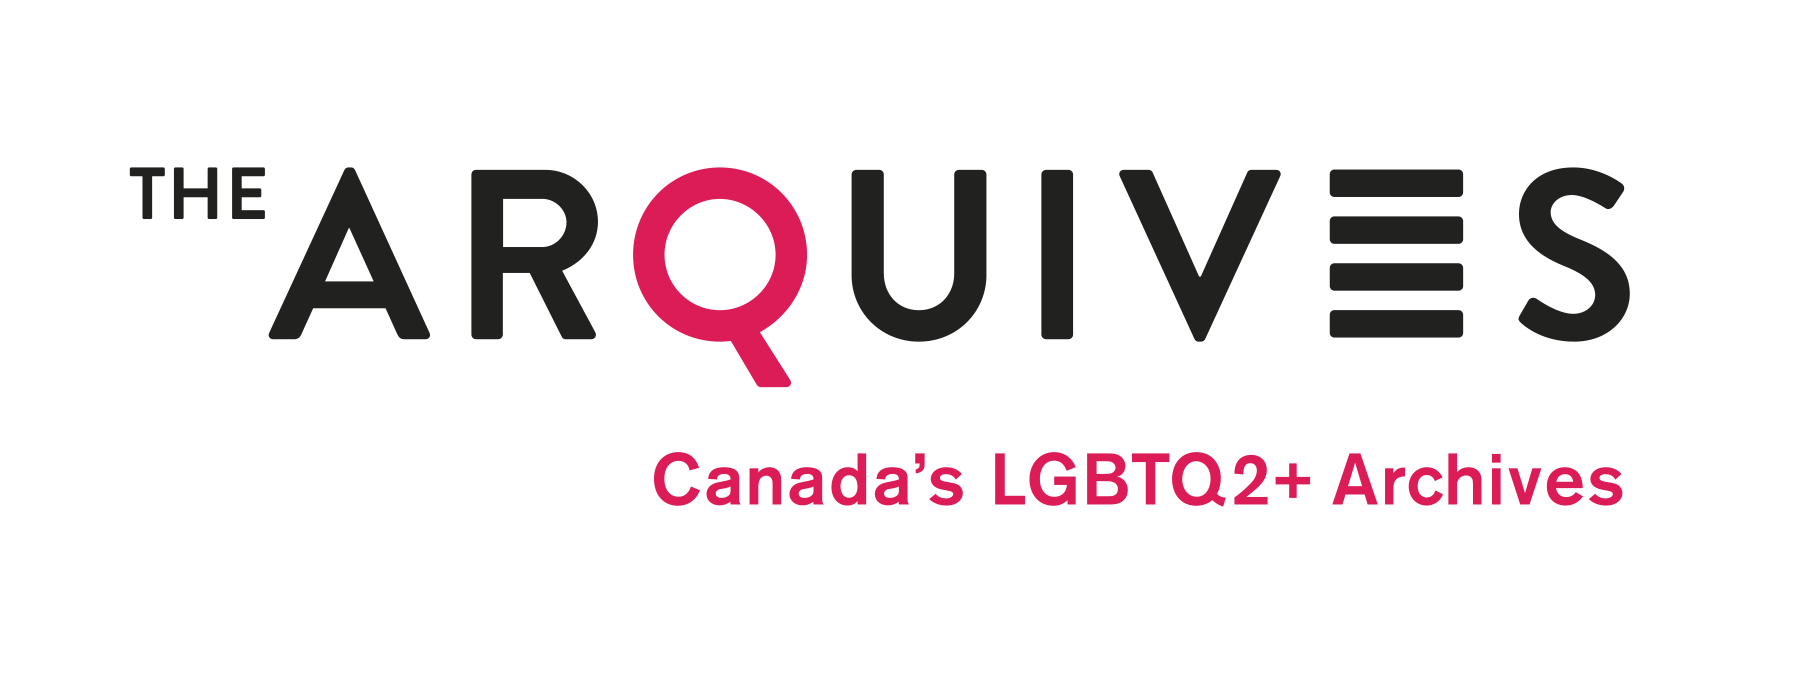 The ARQUIVES Canada's LGBTQ2+ Archives logo. 